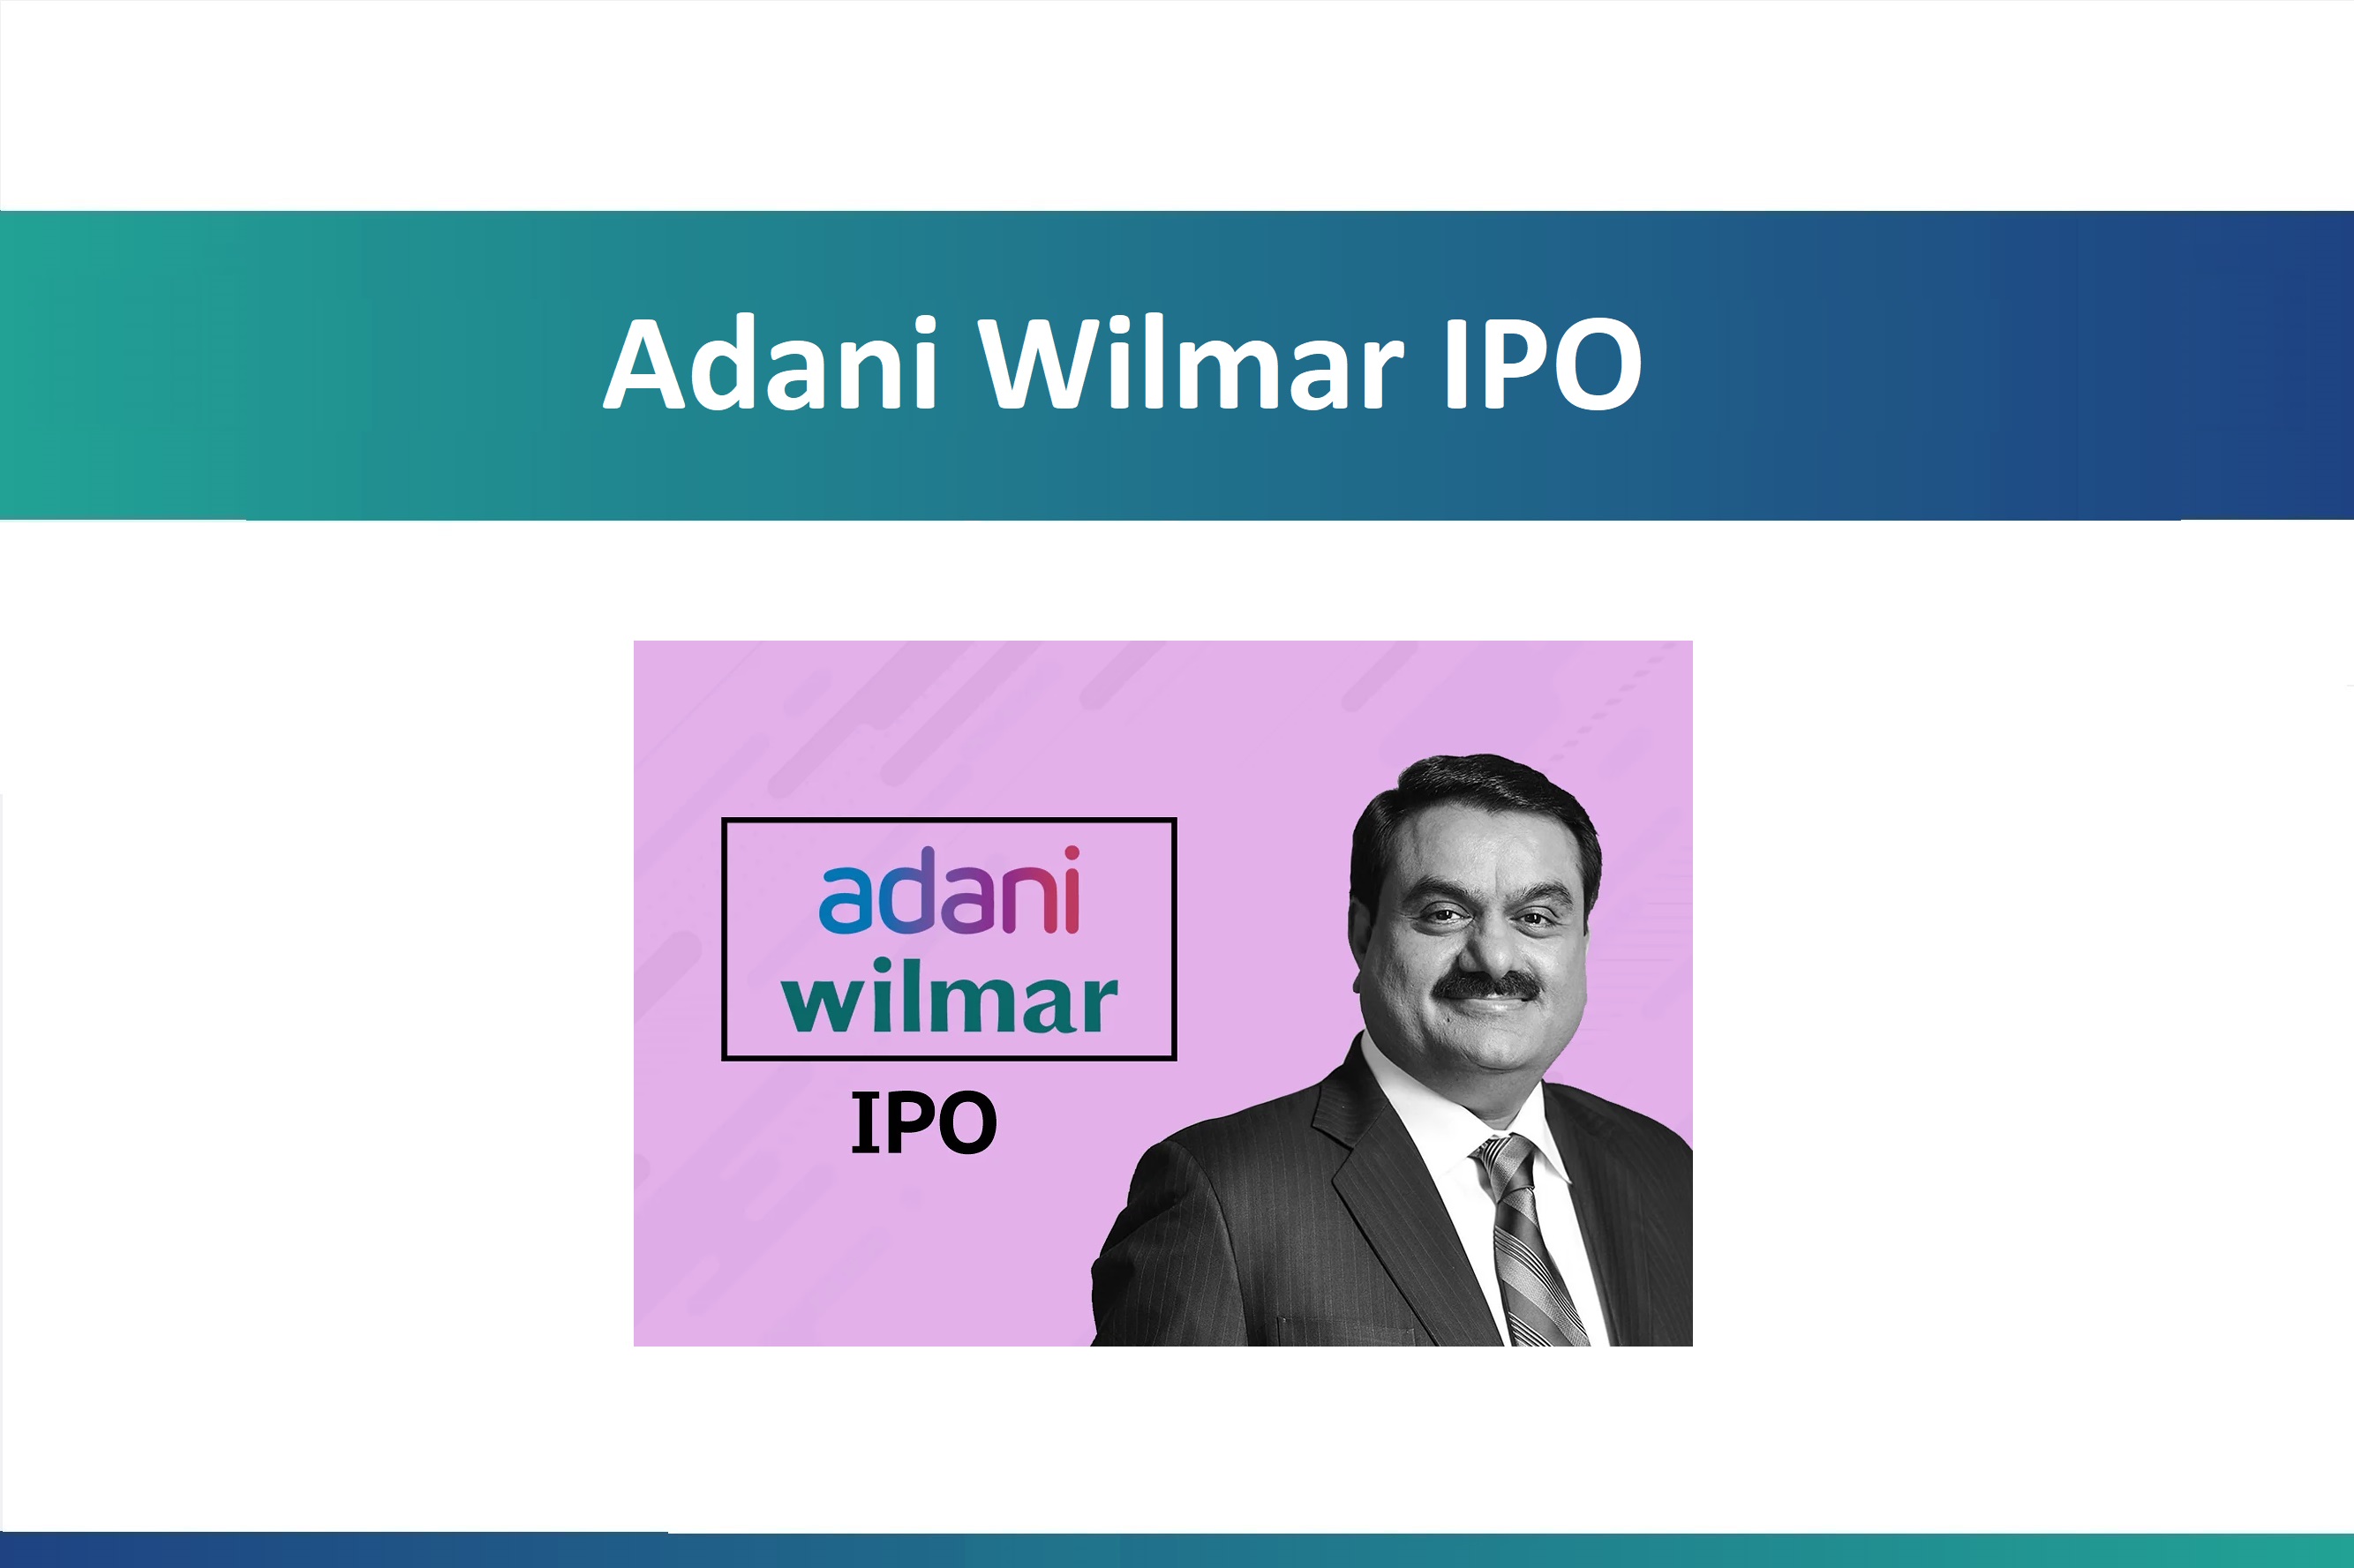 Adani Wilmar IPO to open on Jan 27 2022 at Rs 218-230 per share